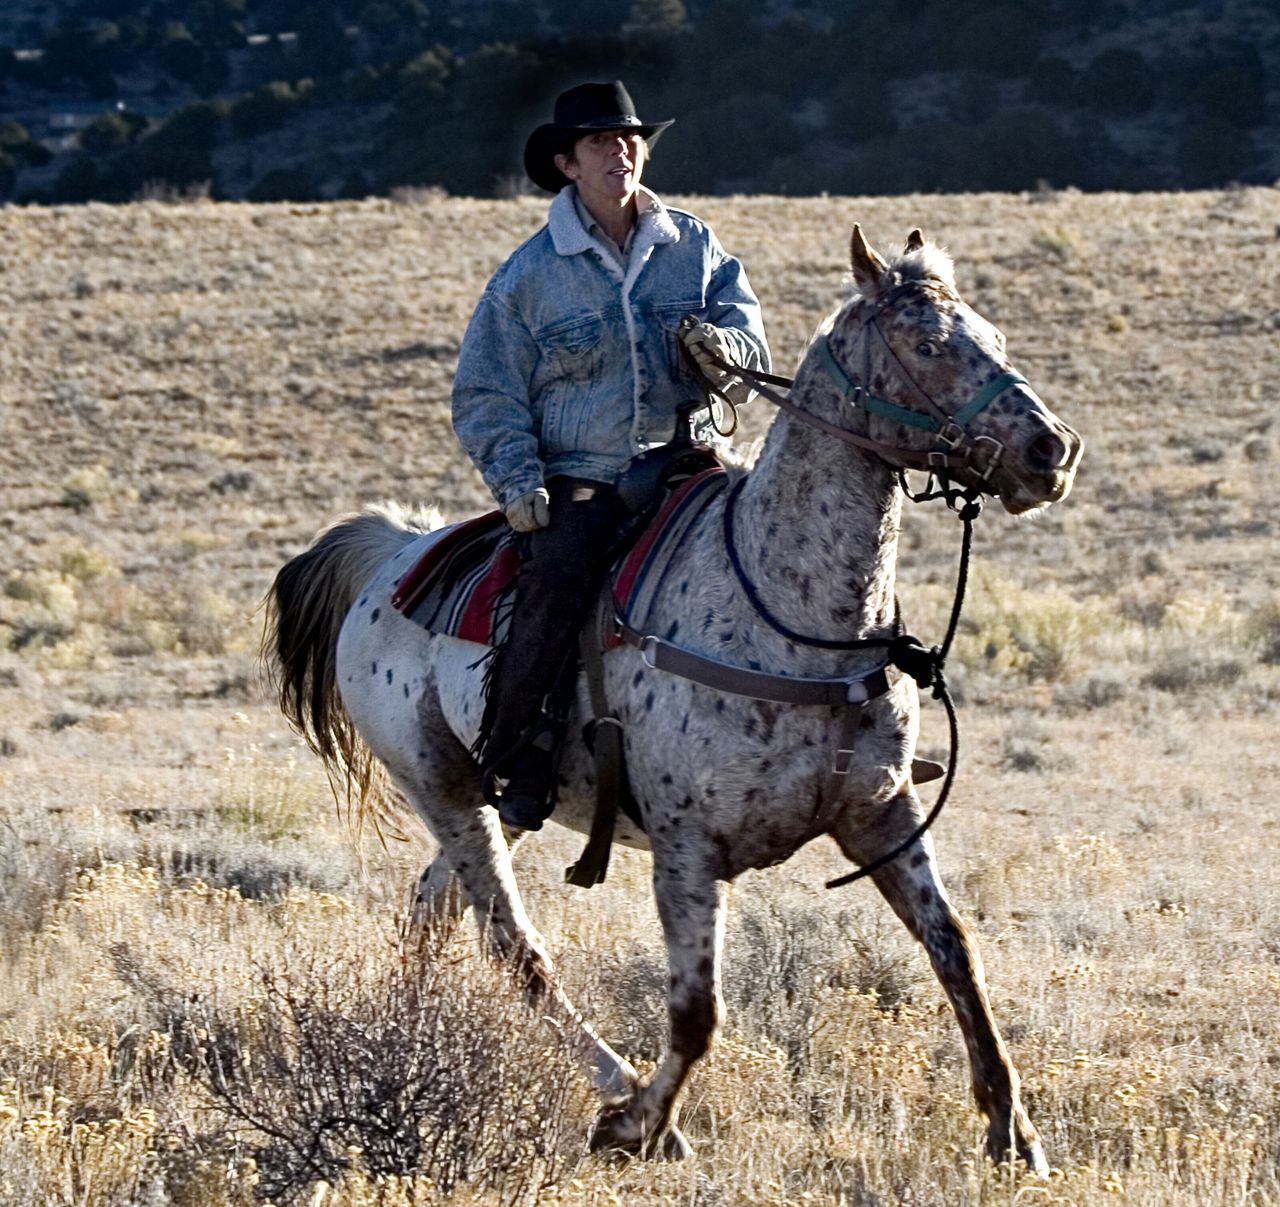 Phyllis rides Spike, an Arabian mare, on a ranch in southern Colorado in 2005.